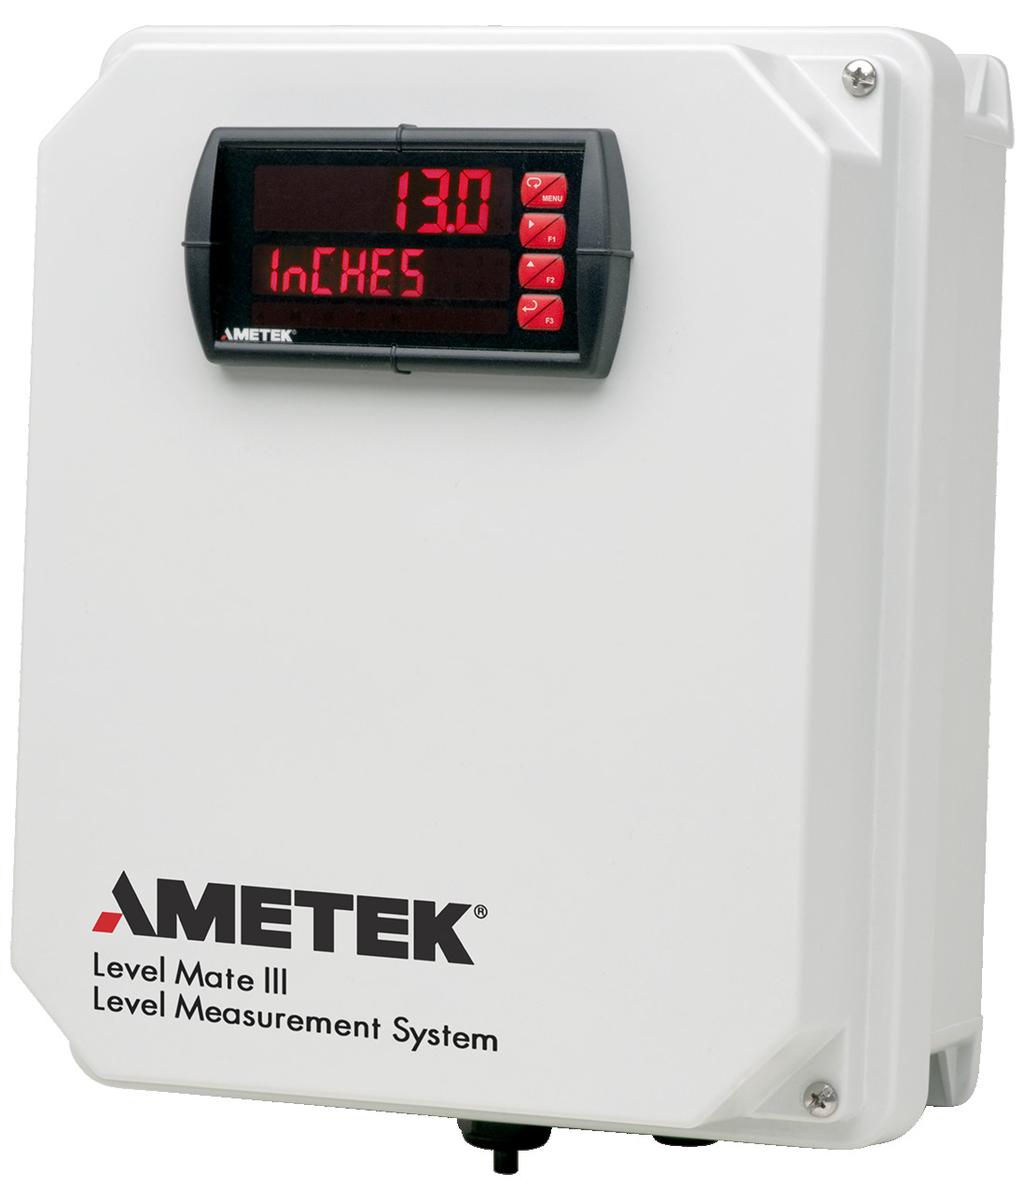 EPMP - 1 DESCRIPTION The AMETEK powered by 85 to 265 VAC will display data from transmitters, transducers, scales, and other process instruments.